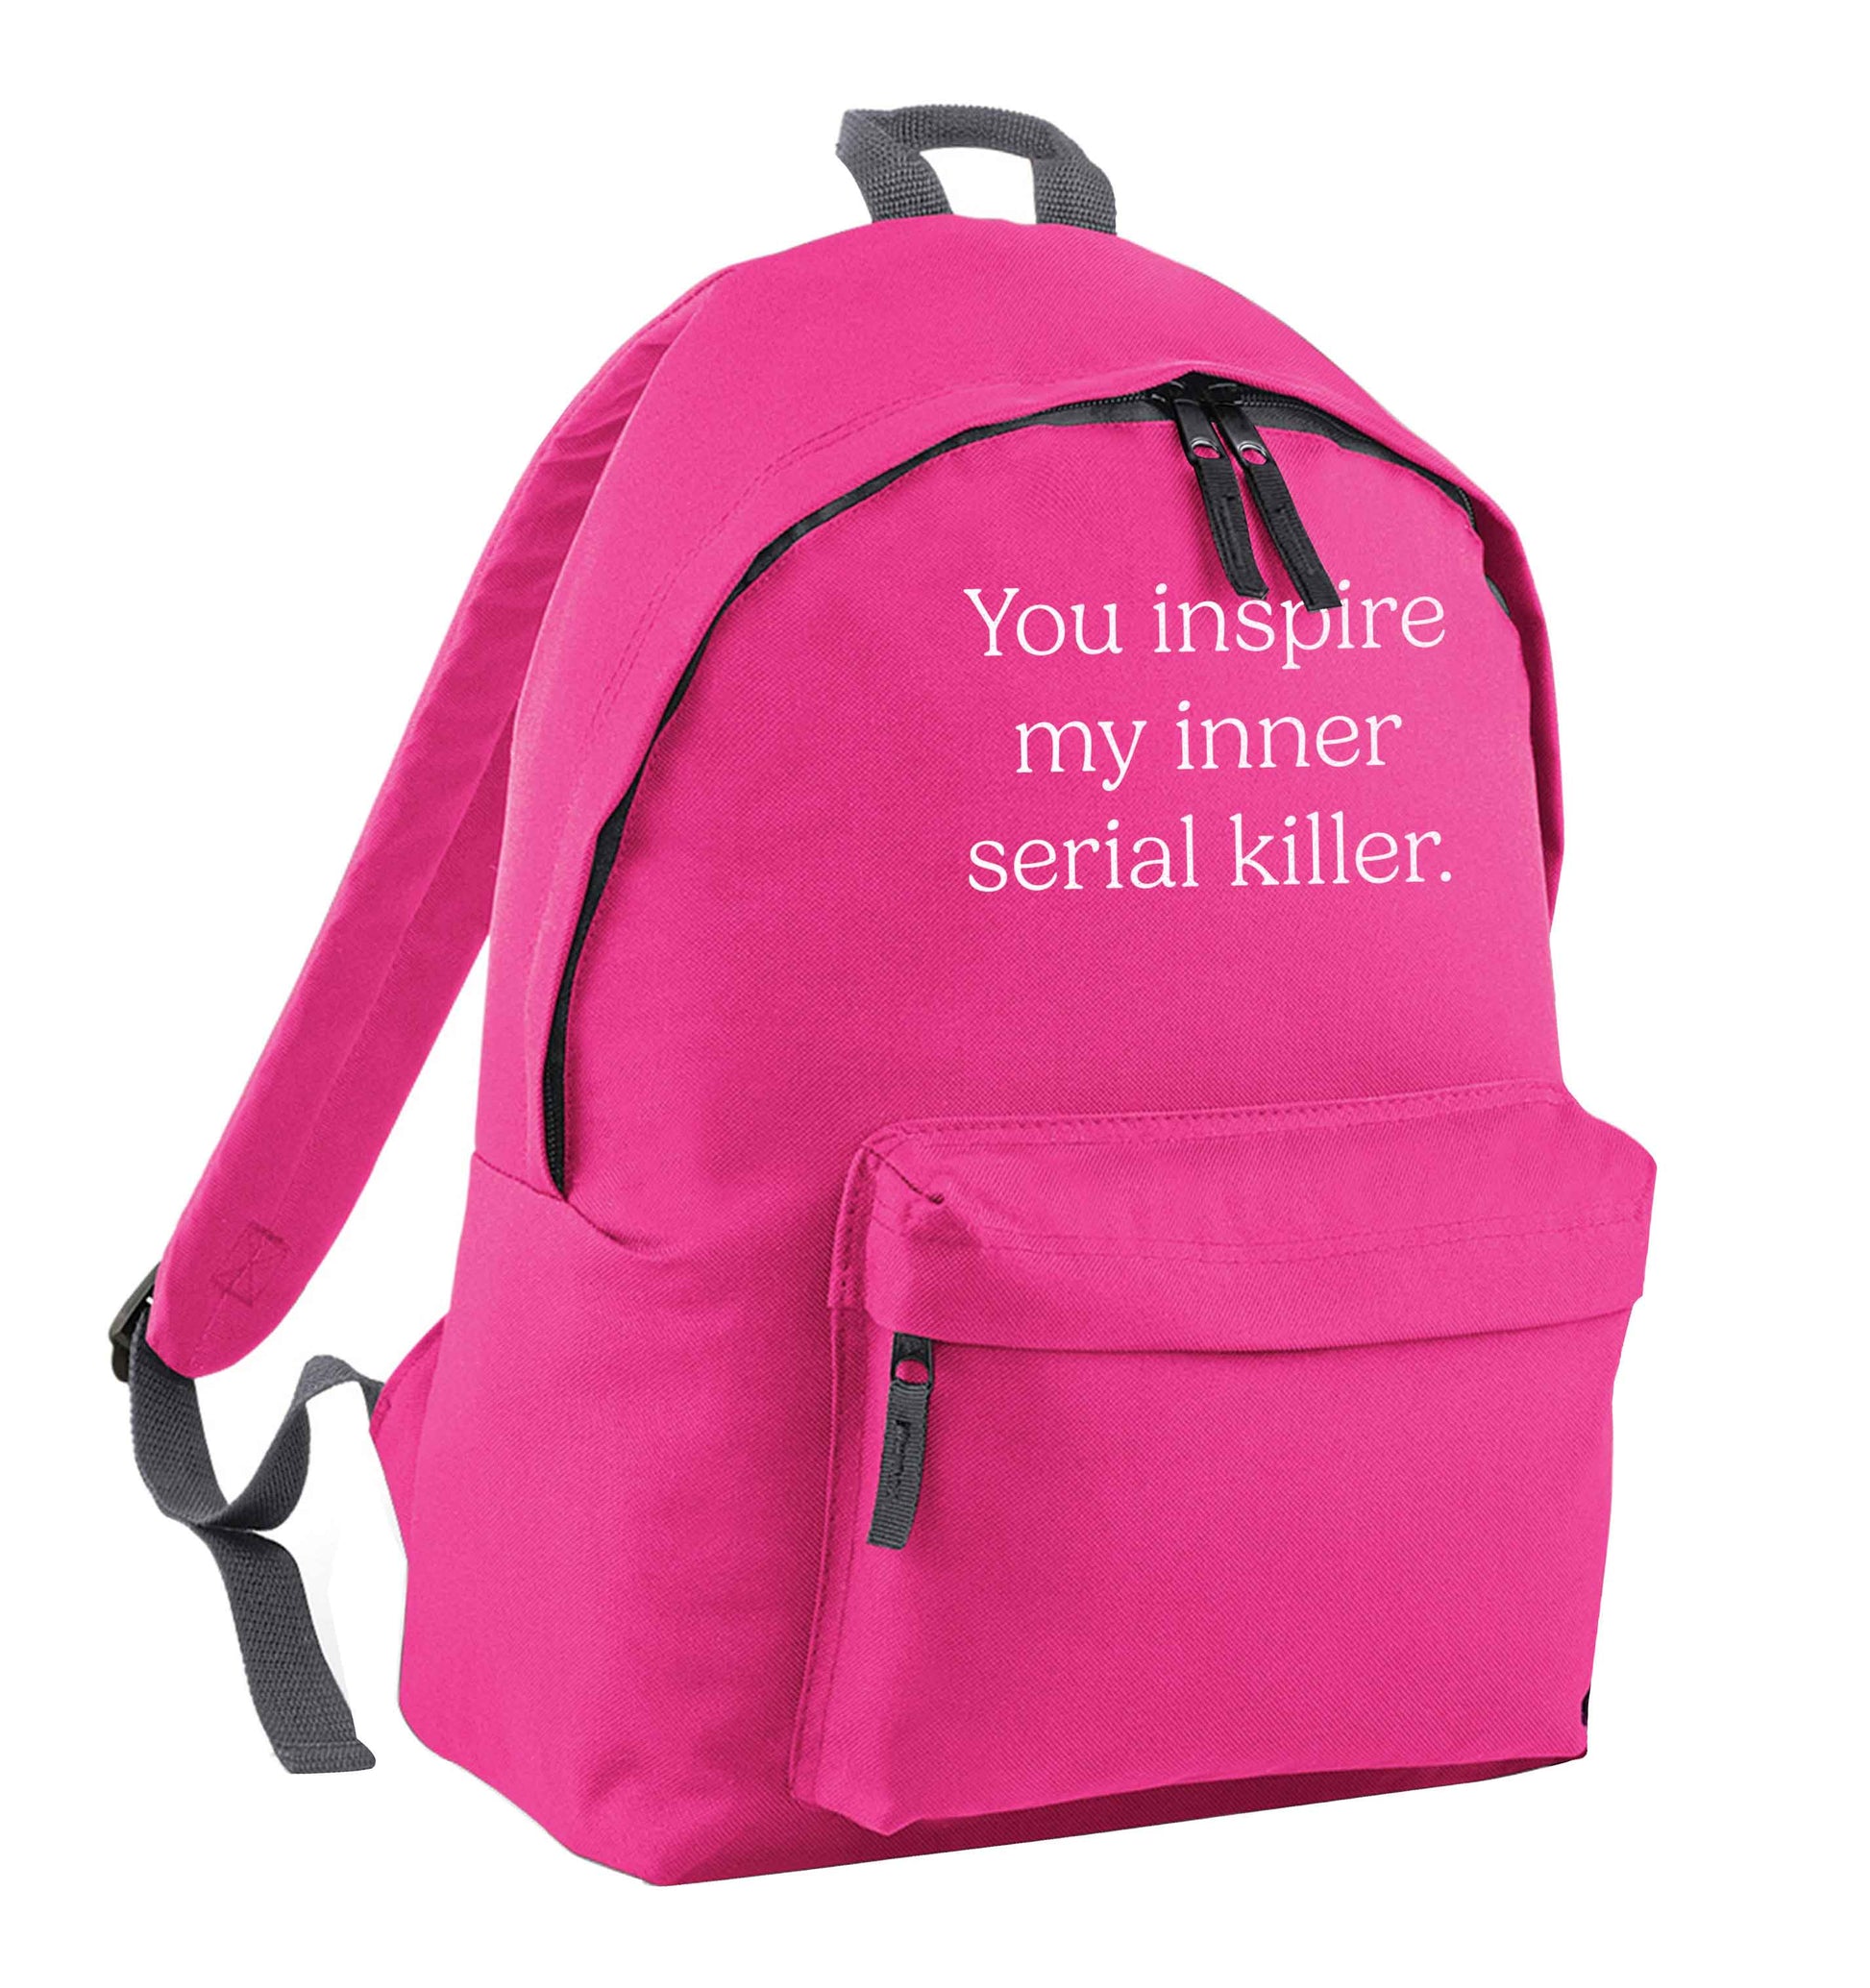 You inspire my inner serial killer Kit pink adults backpack